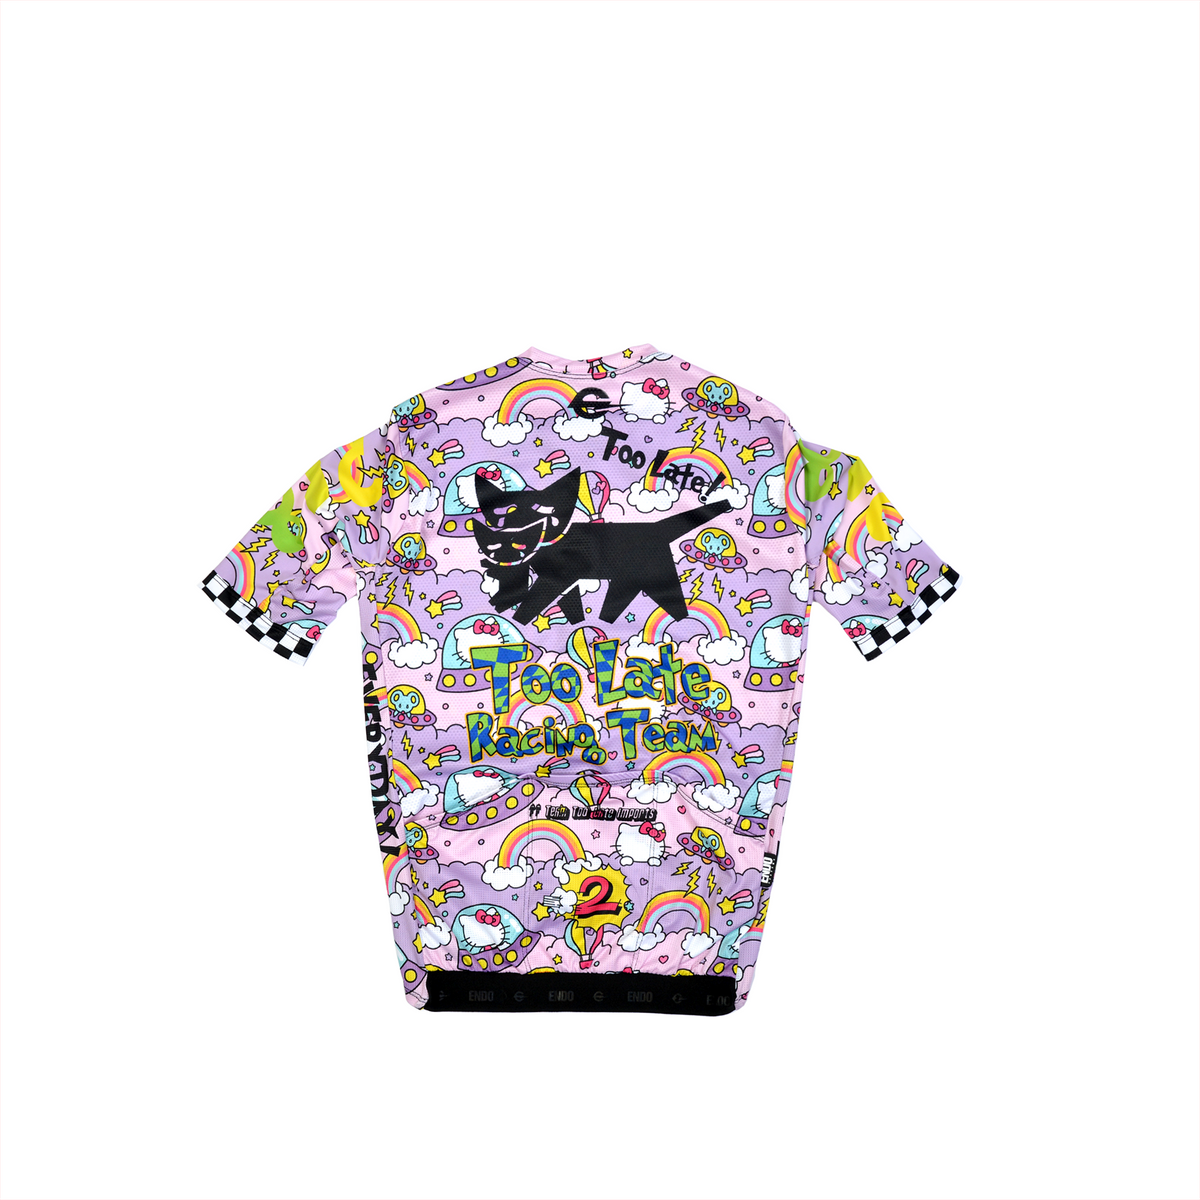 TEAM TOO LATE - WOMEN'S LADERA JERSEY - MEOW